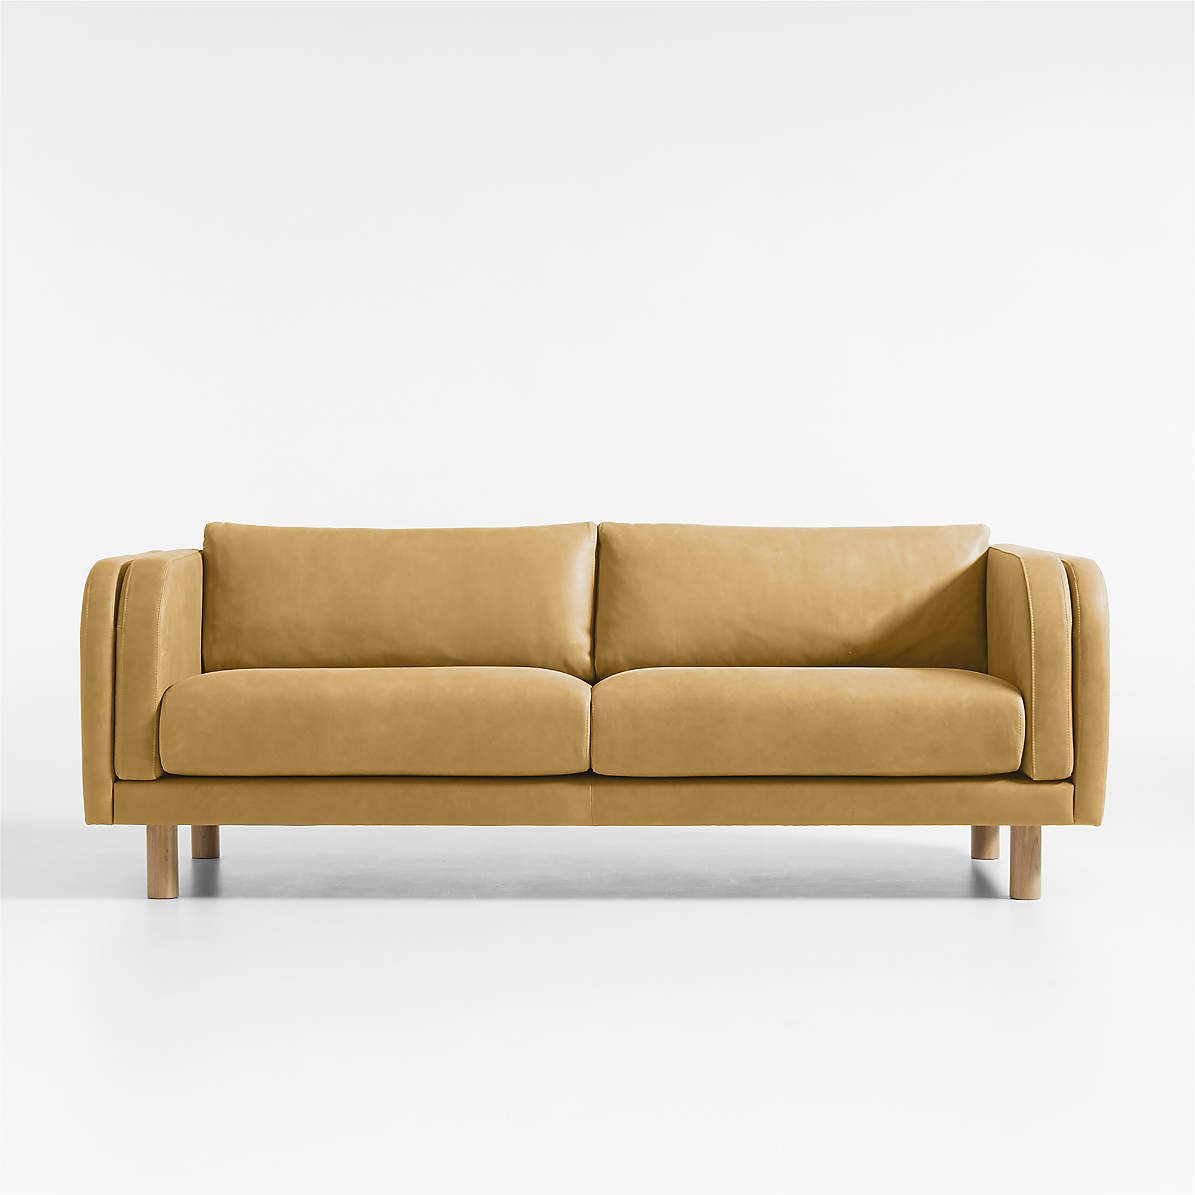 Pershing Leather Curved Arm 79" Sofa + Reviews | Crate & Barrel Pertaining To Sofas With Curved Arms (View 11 of 15)